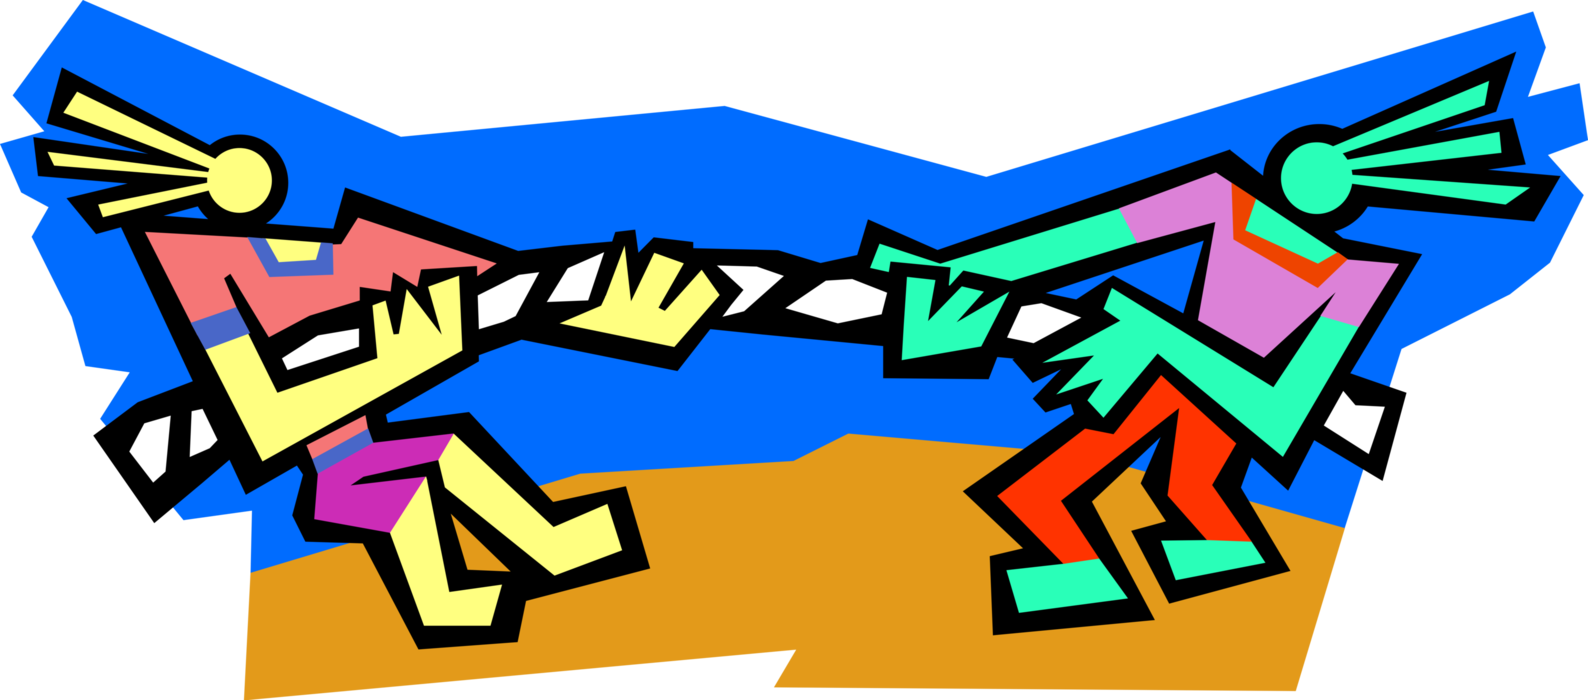 Vector Illustration of Rope Tug-of-War Between Two Competitors